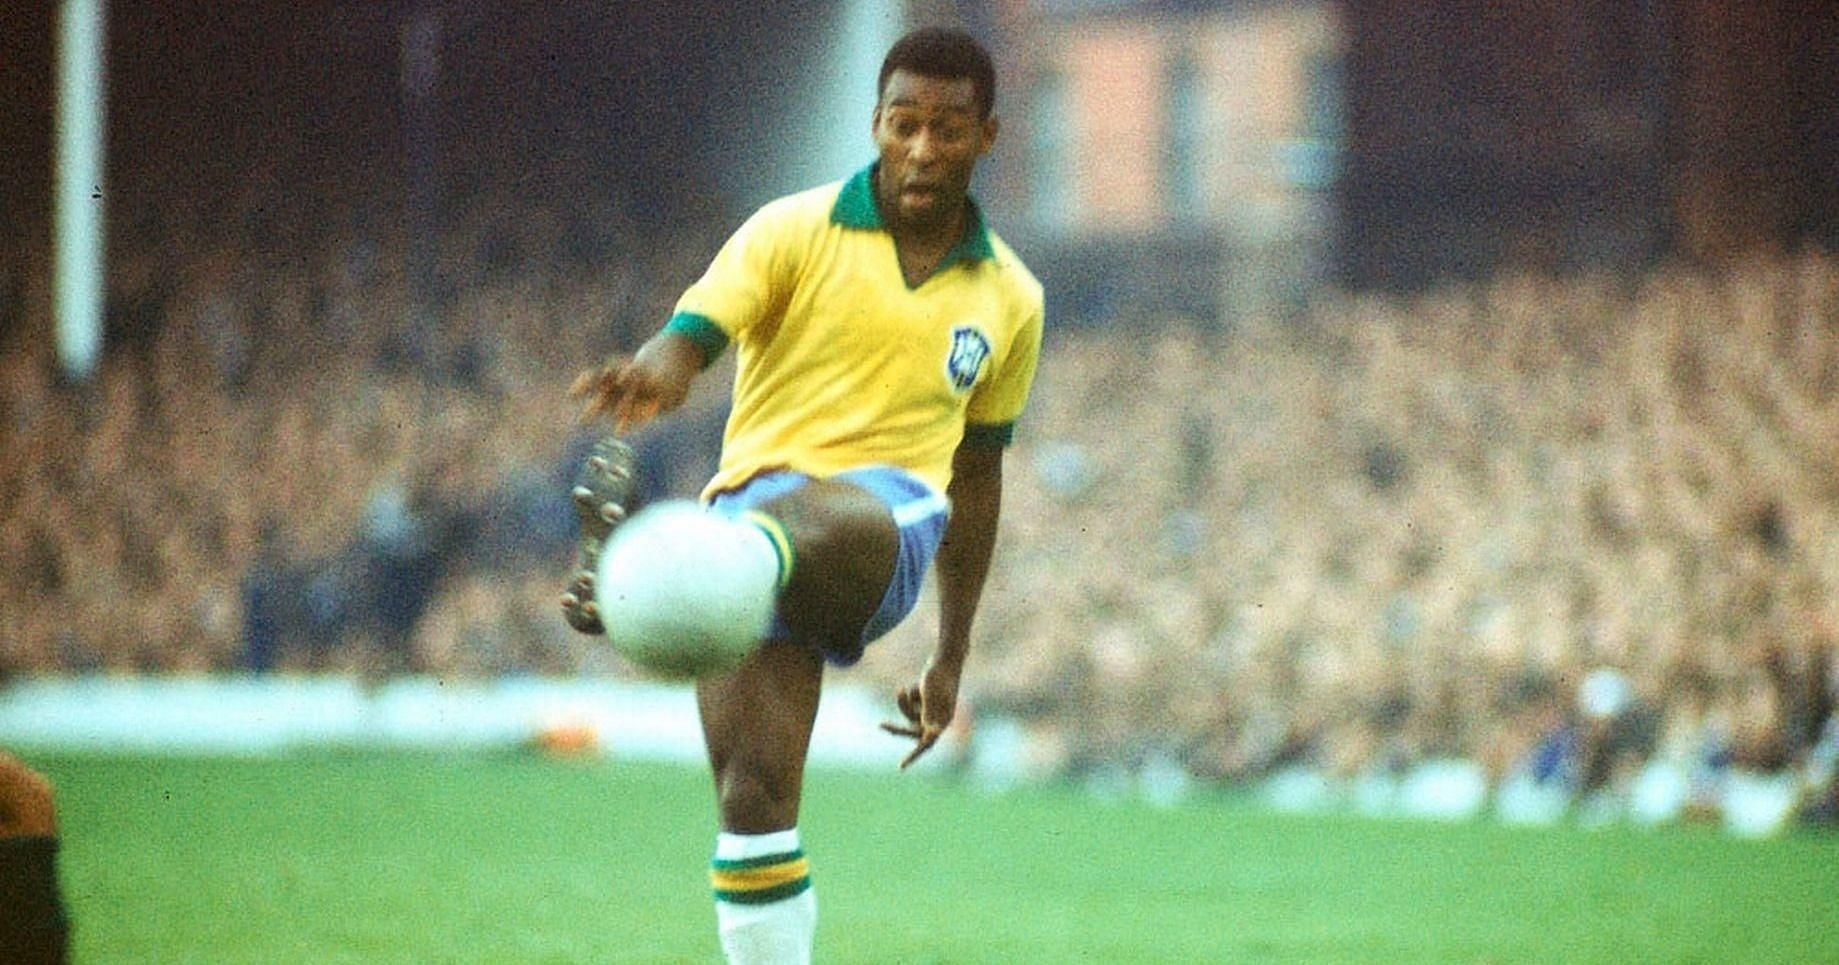 Pele in action for Brazil (cred: IndiaTimes)